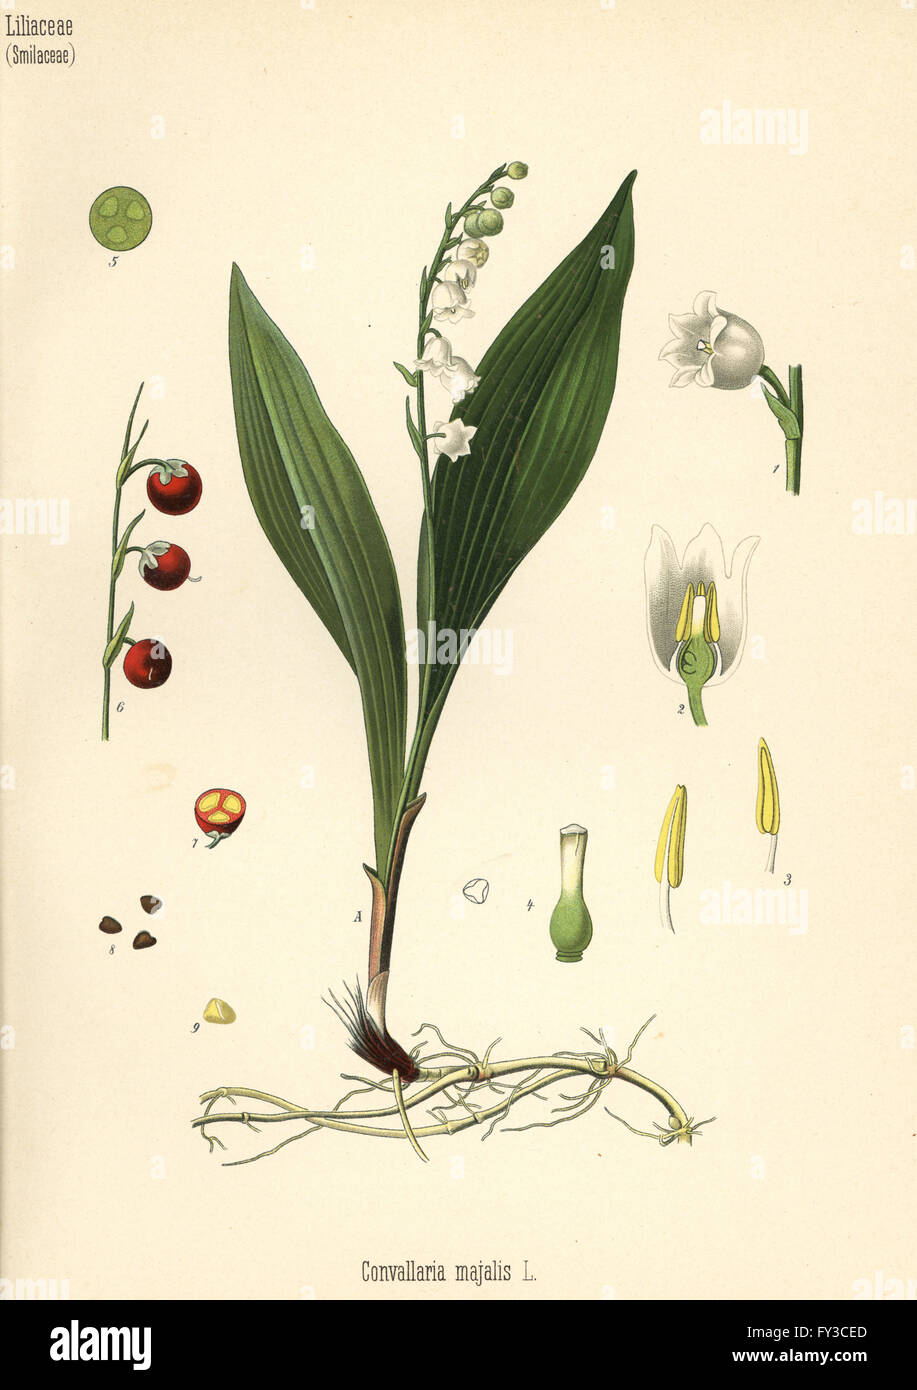 Lily of the valley, Convallaria majalis. Chromolithograph after a botanical illustration from Hermann Adolph Koehler's Medicinal Plants, edited by Gustav Pabst, Koehler, Germany, 1887. Stock Photo